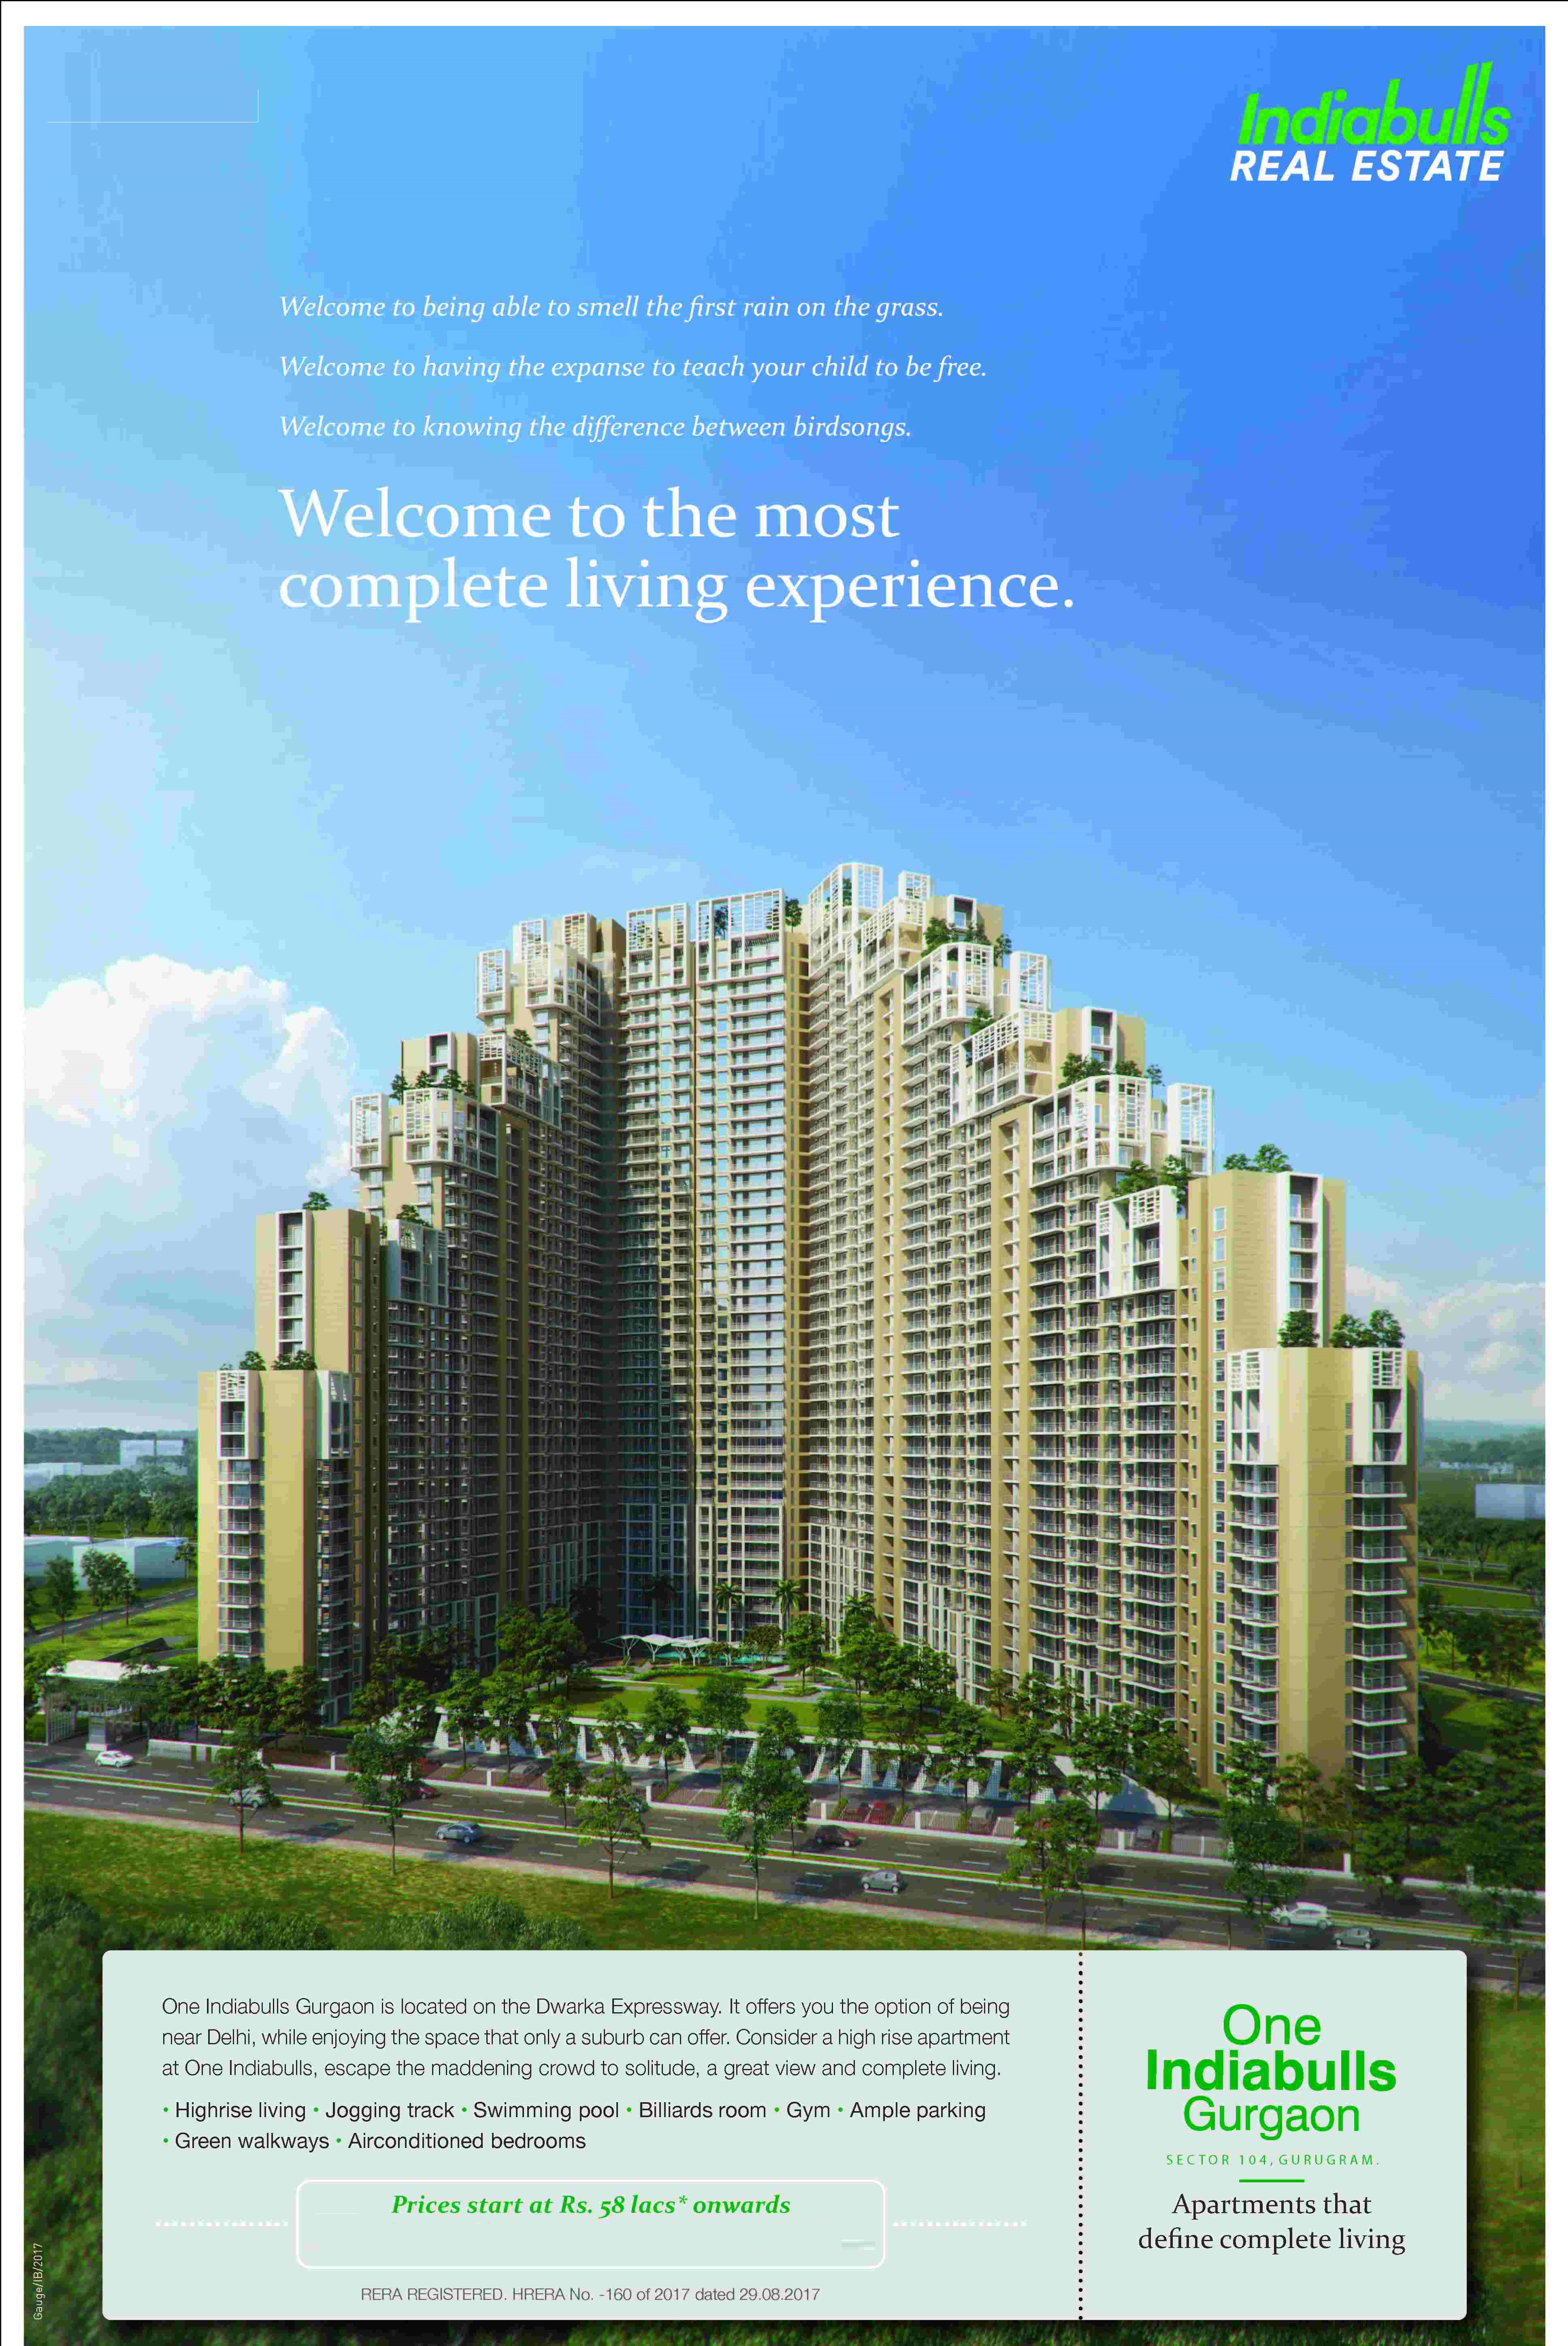 Welcome to the most complete living experience at One Indiabulls in Gurgaon